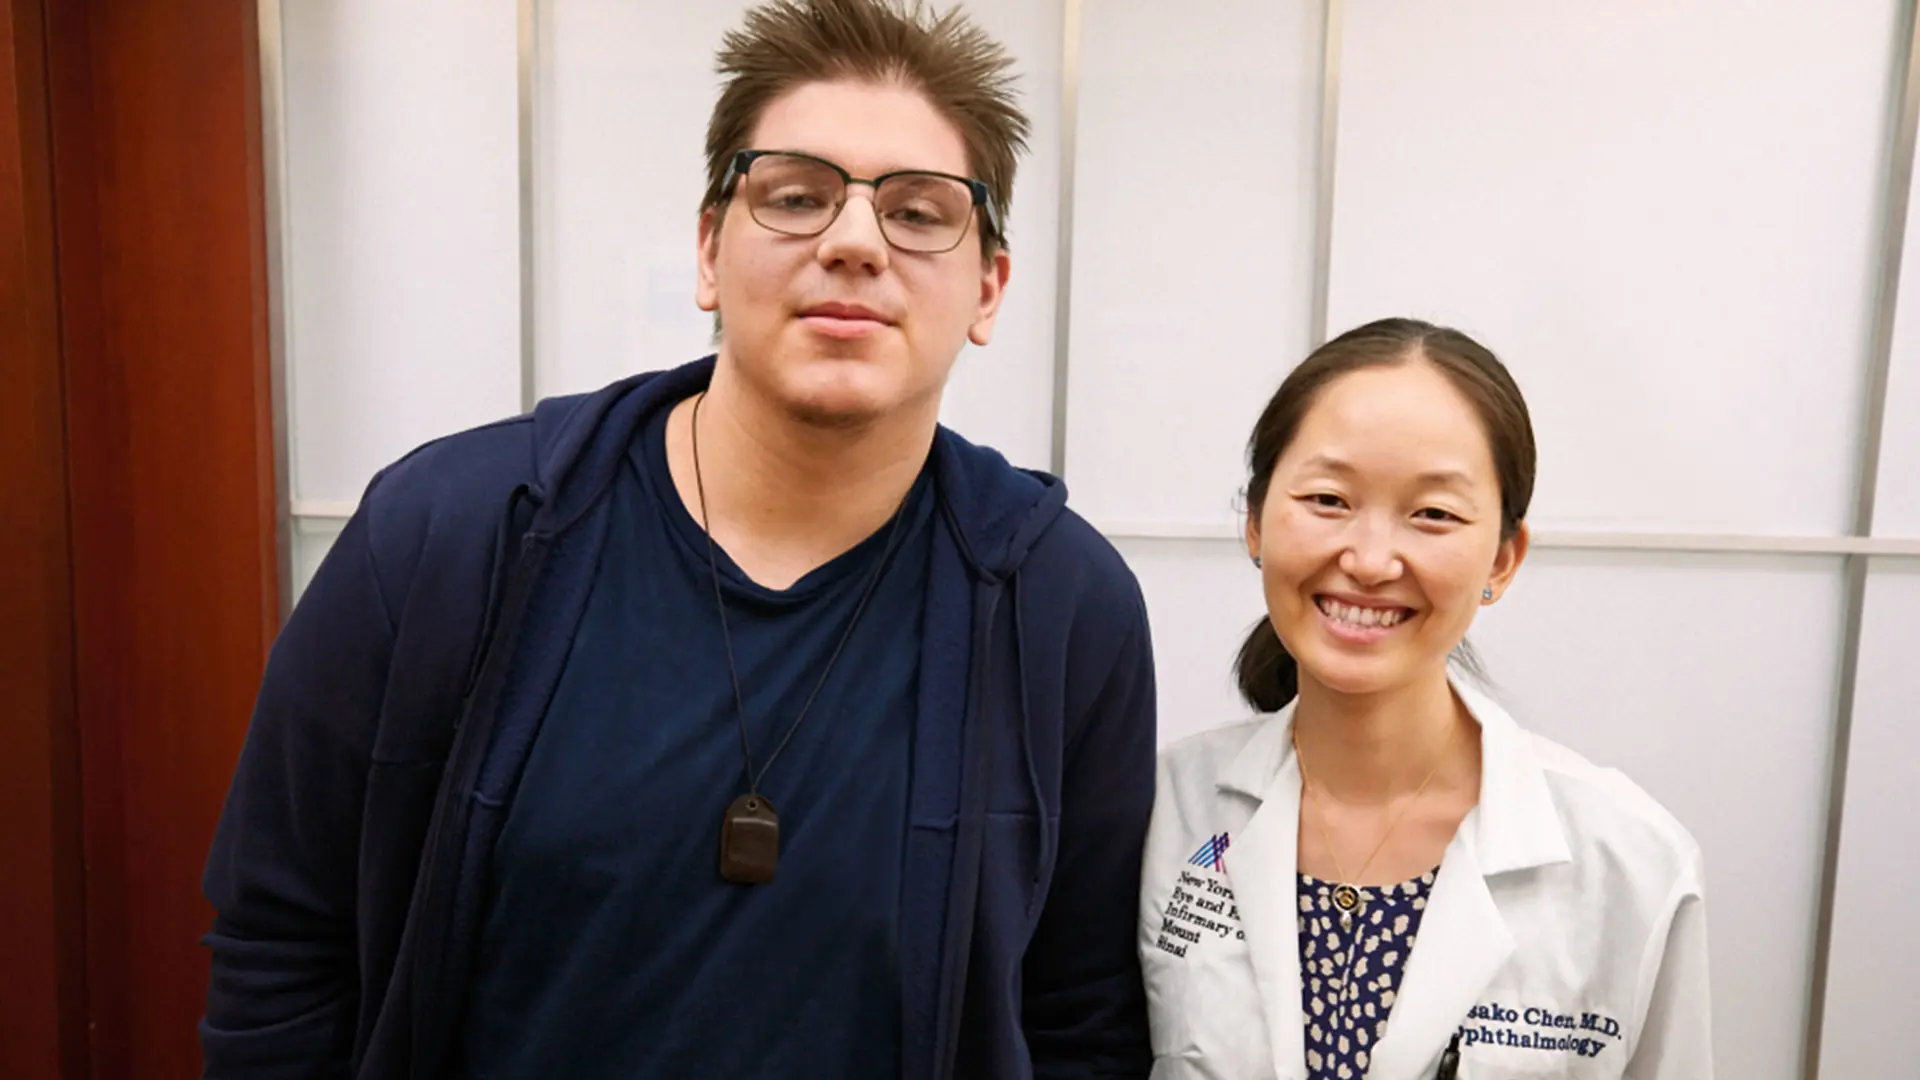 Amer and Dr. Chen during a follow-up visit